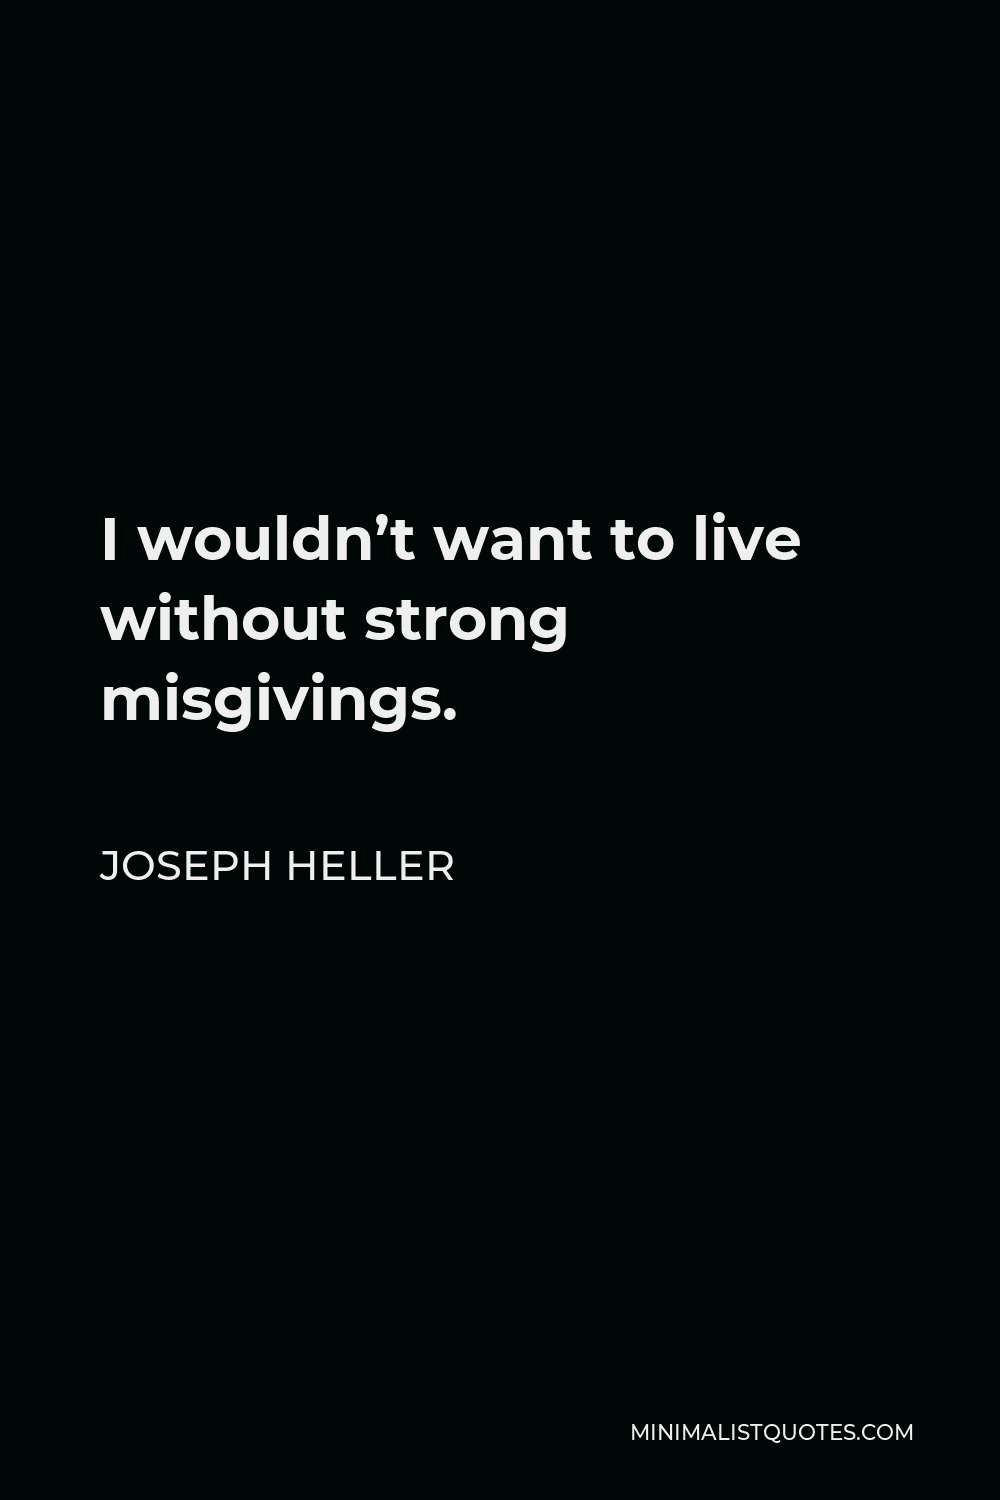 Joseph Heller Quote: I don't believe in miracles because it's been a ...